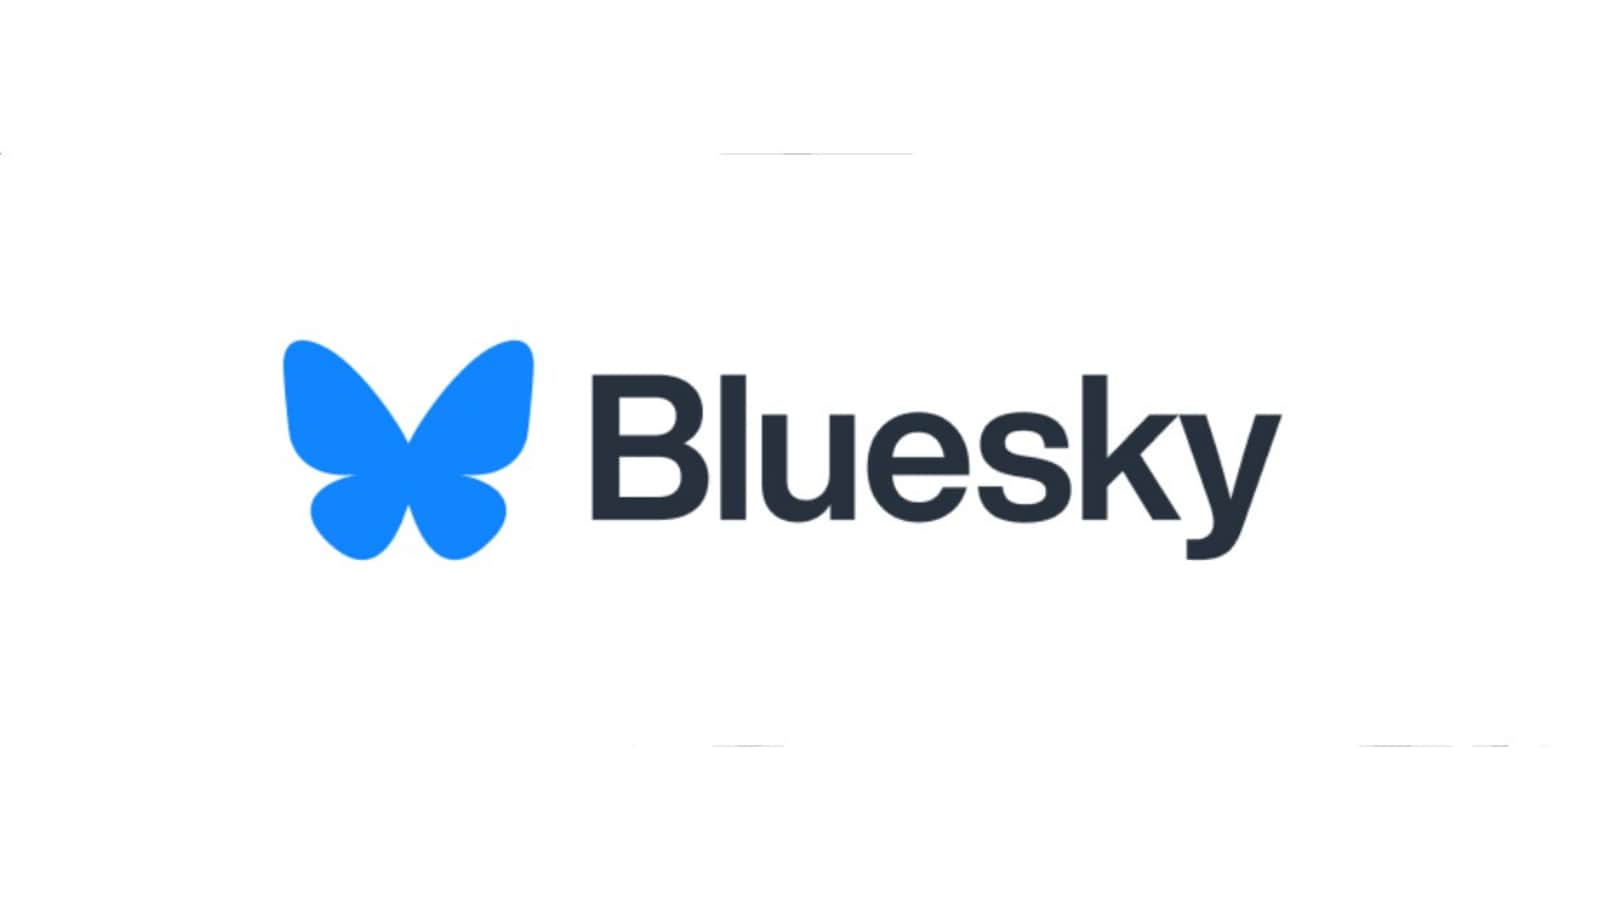 Bluesky update 1.61 is here! In-app video and music player added, ‘Hide post’ feature arrives too